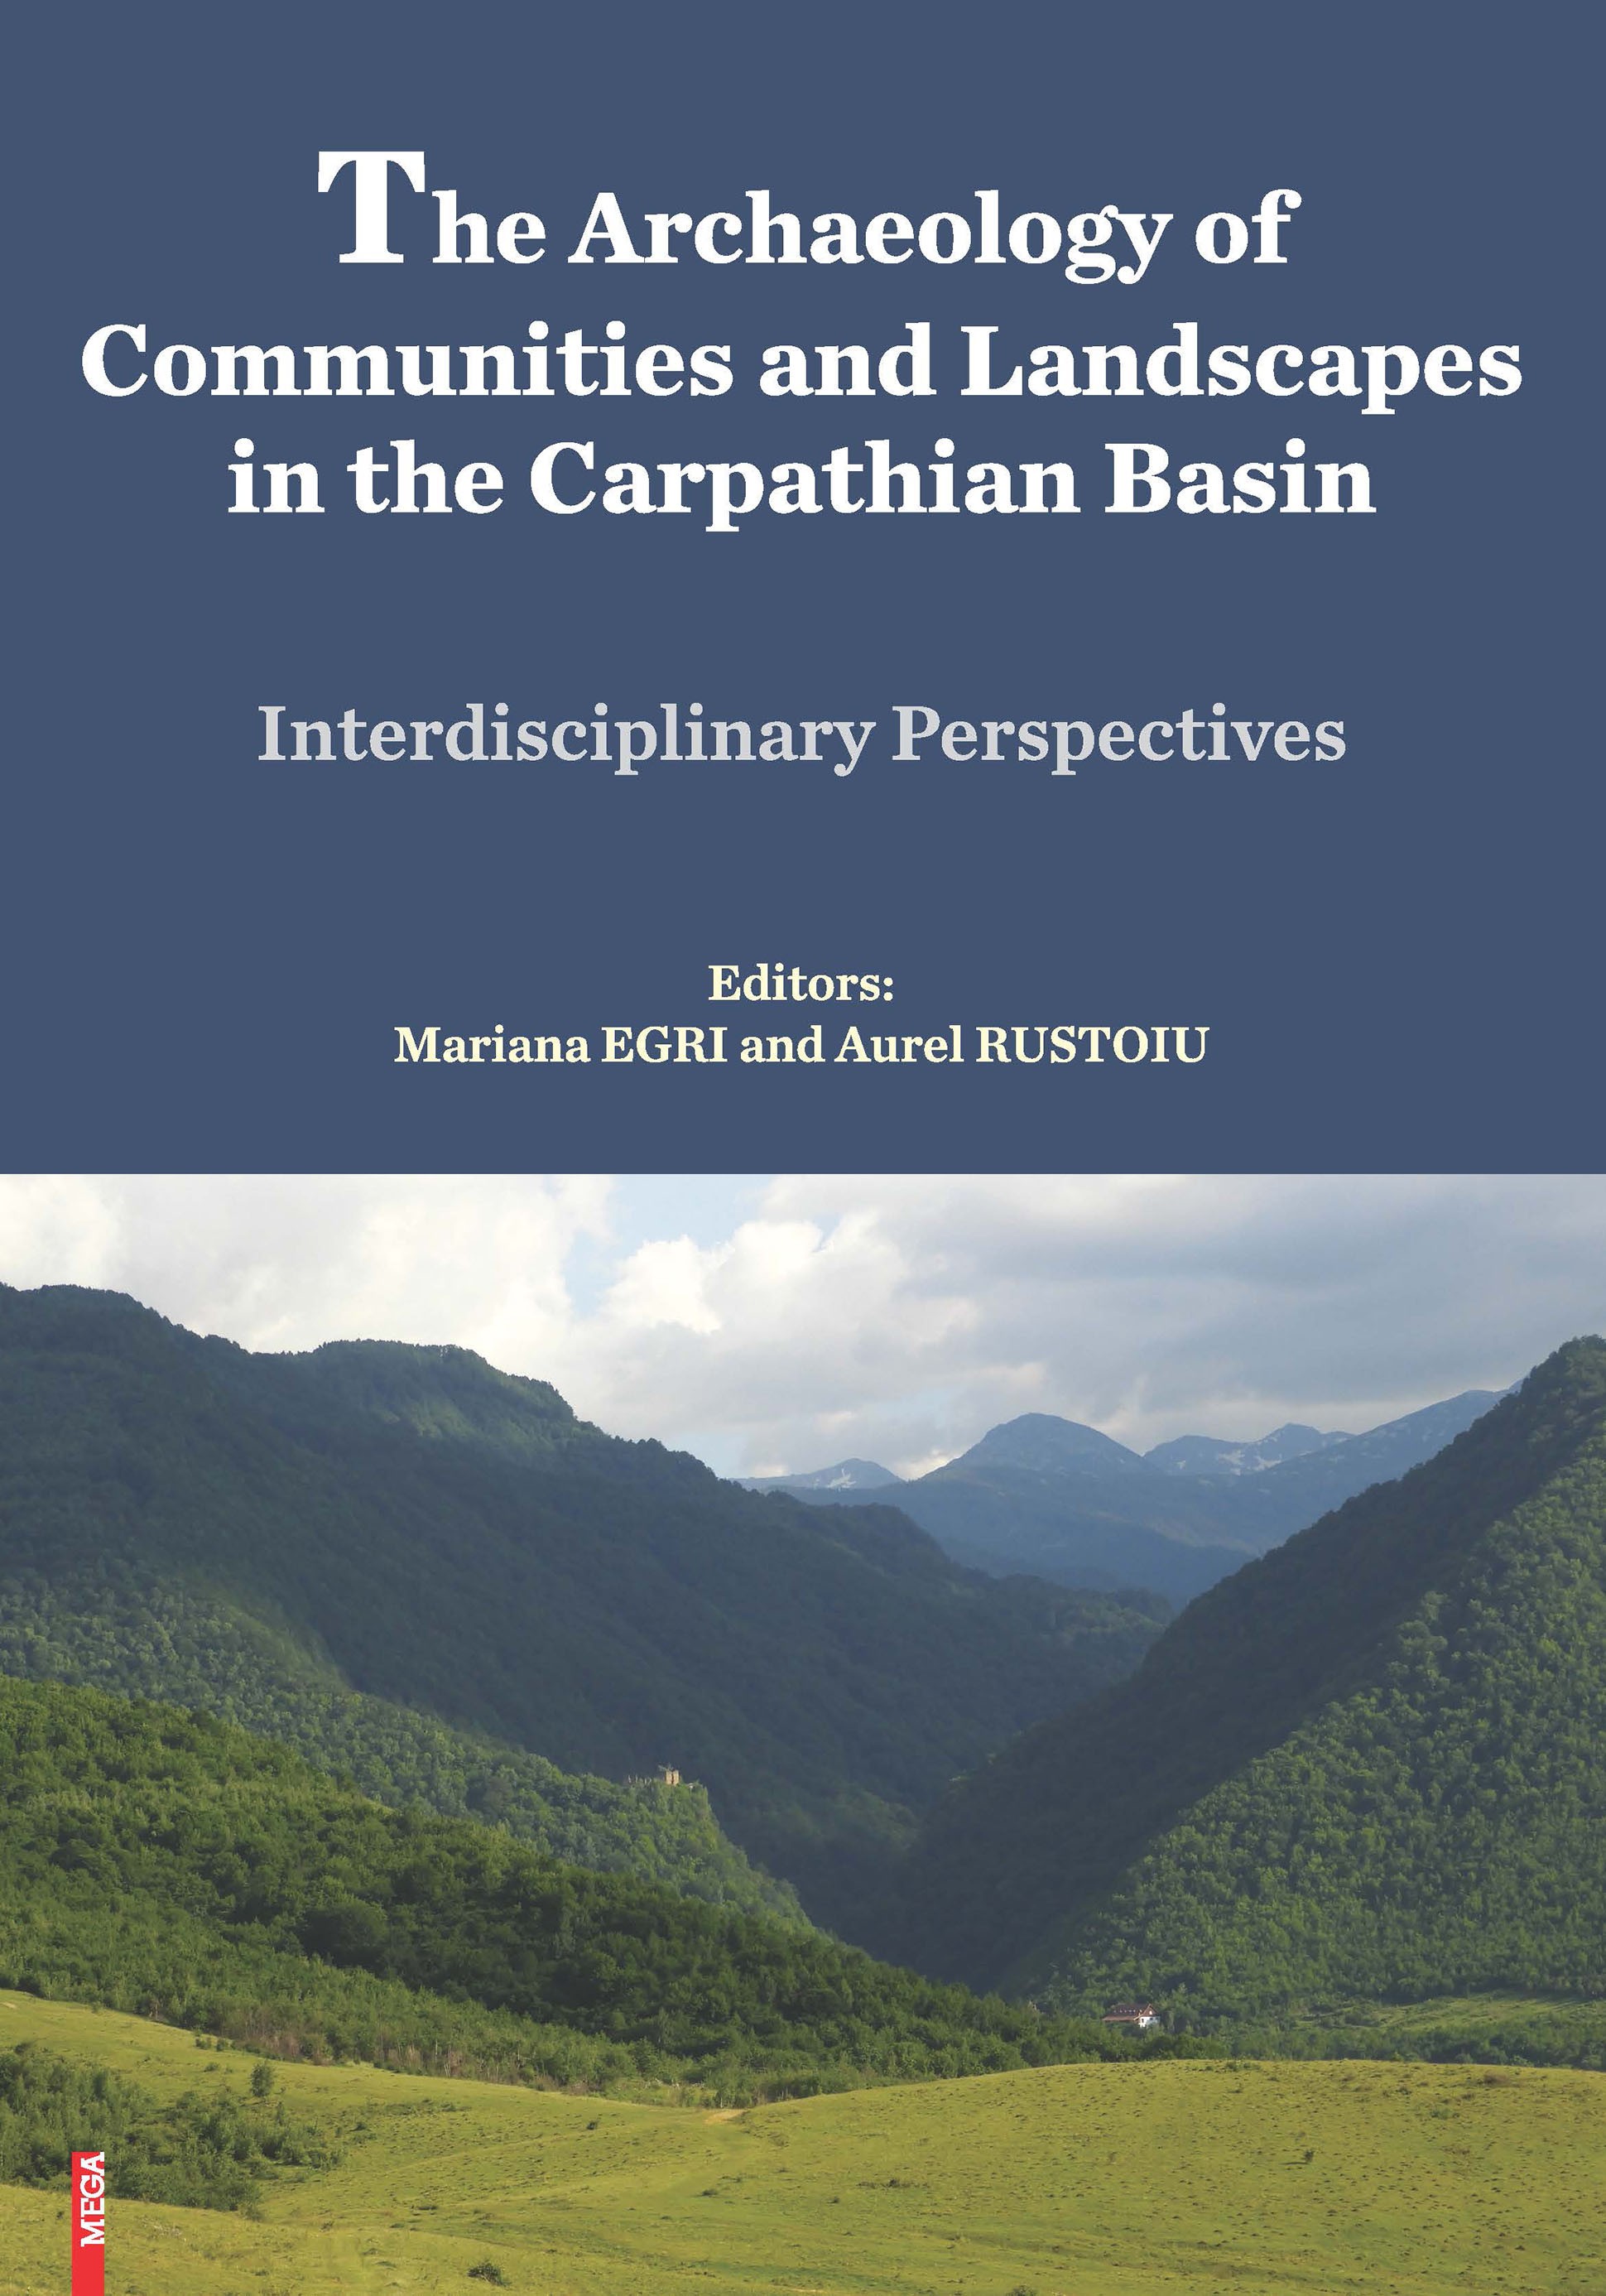 Egri, Mariana – Aurel Rustoiu : The Archaeology of Communities and Landscapes in the Carpathian Basin